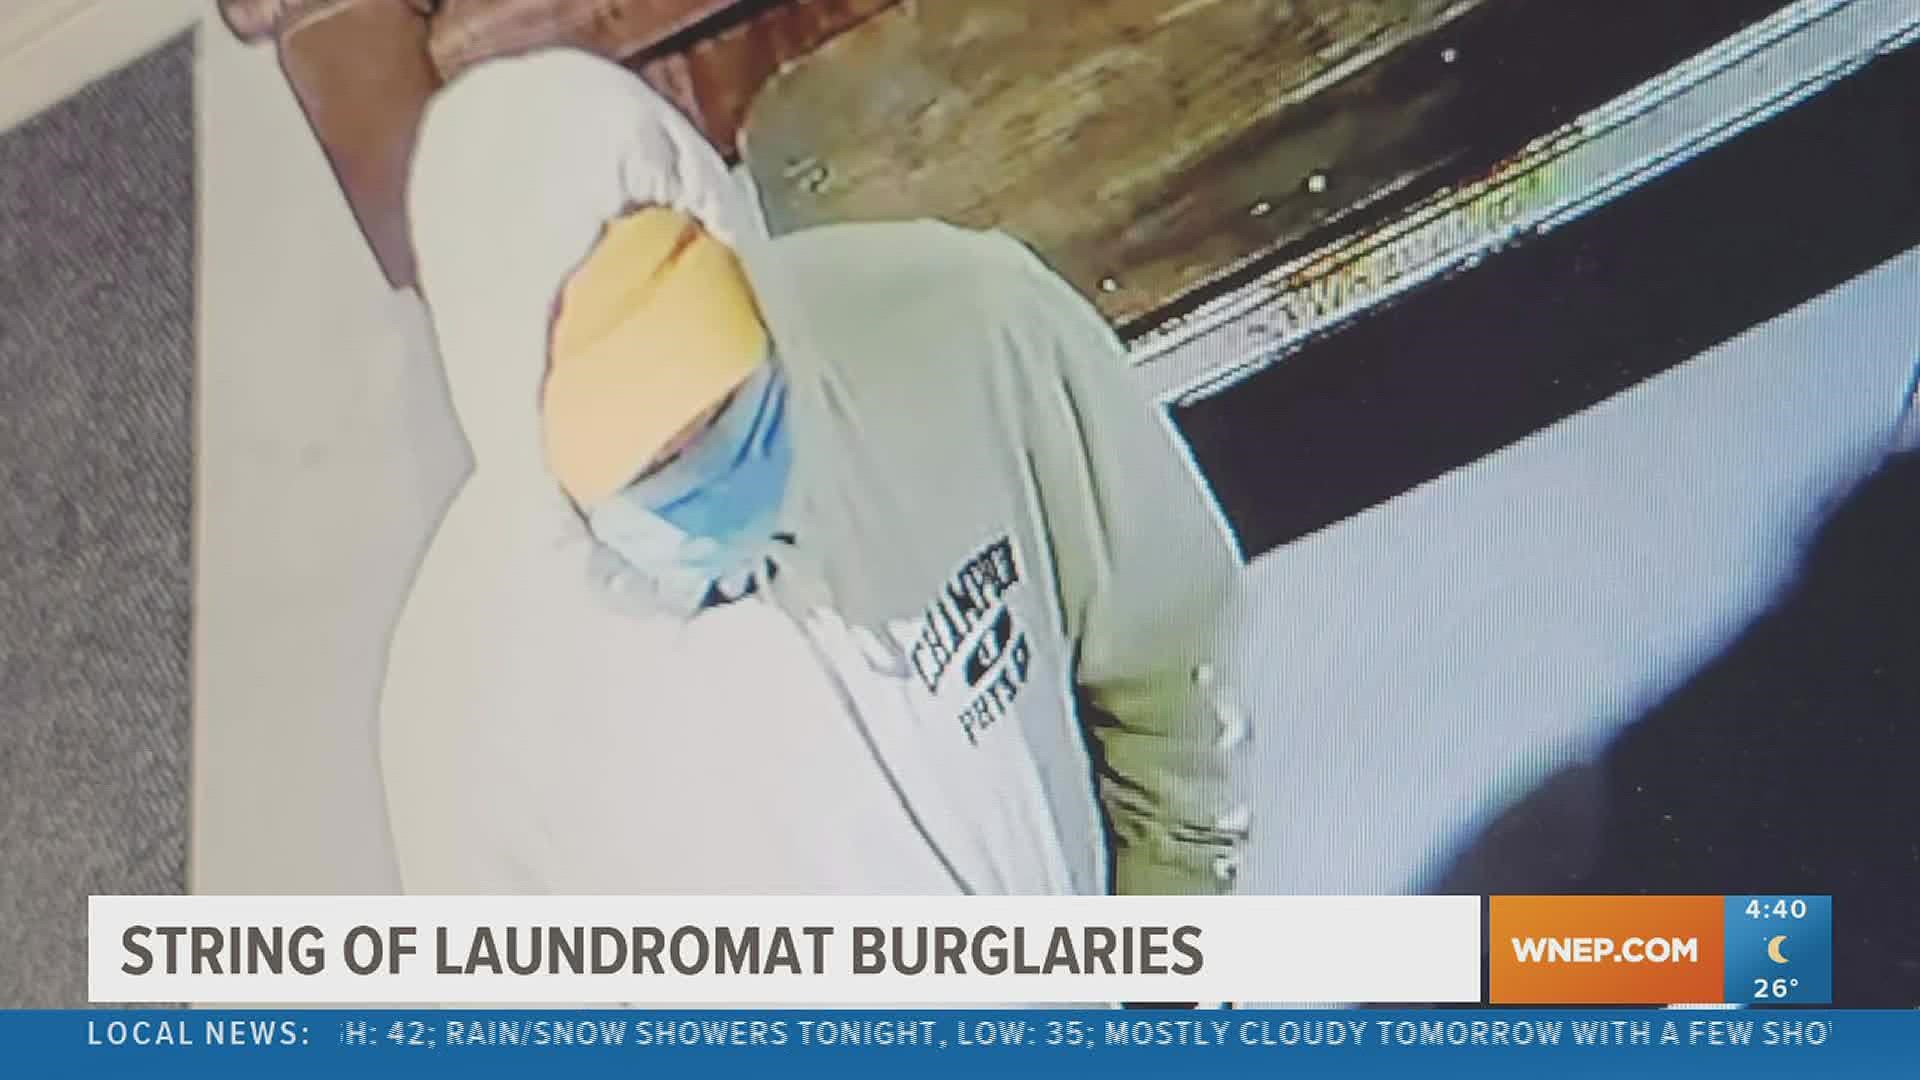 Troopers say burglars hit several laundry businesses in Northumberland and Union Counties.